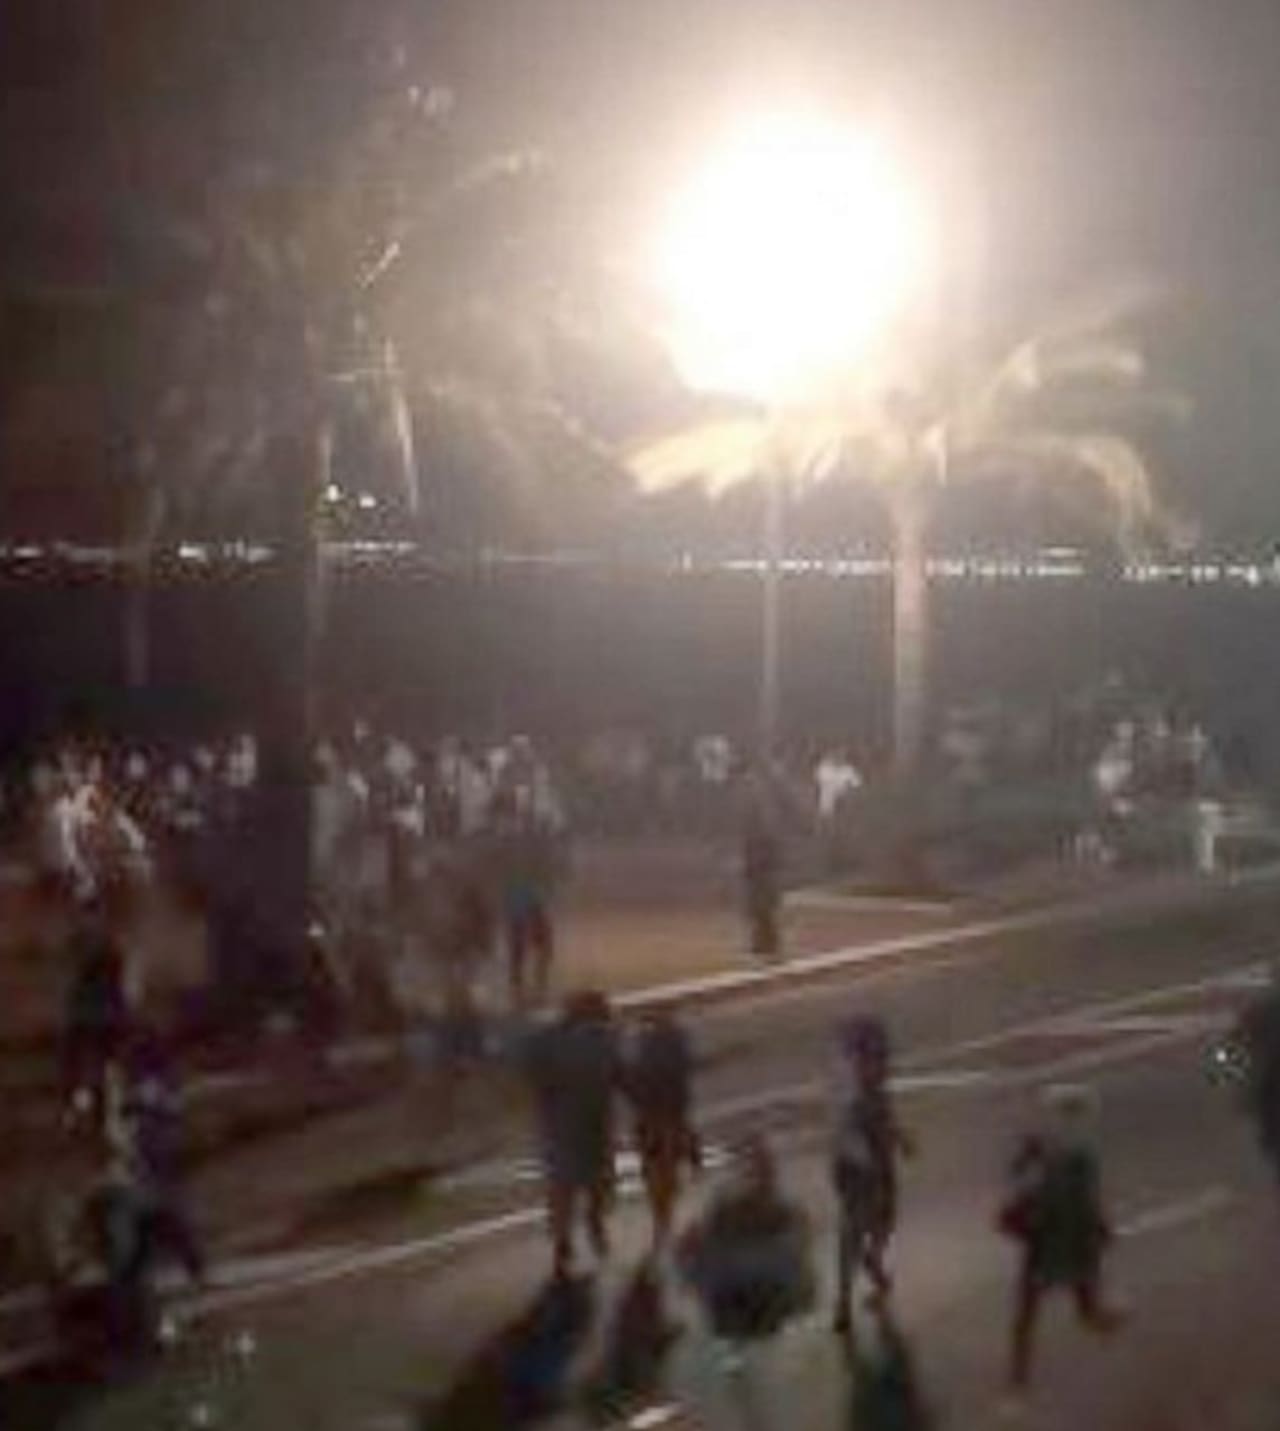 Bastille Day revelers in Nice, France run for cover after a truck rammed through the crowd Wednesday.